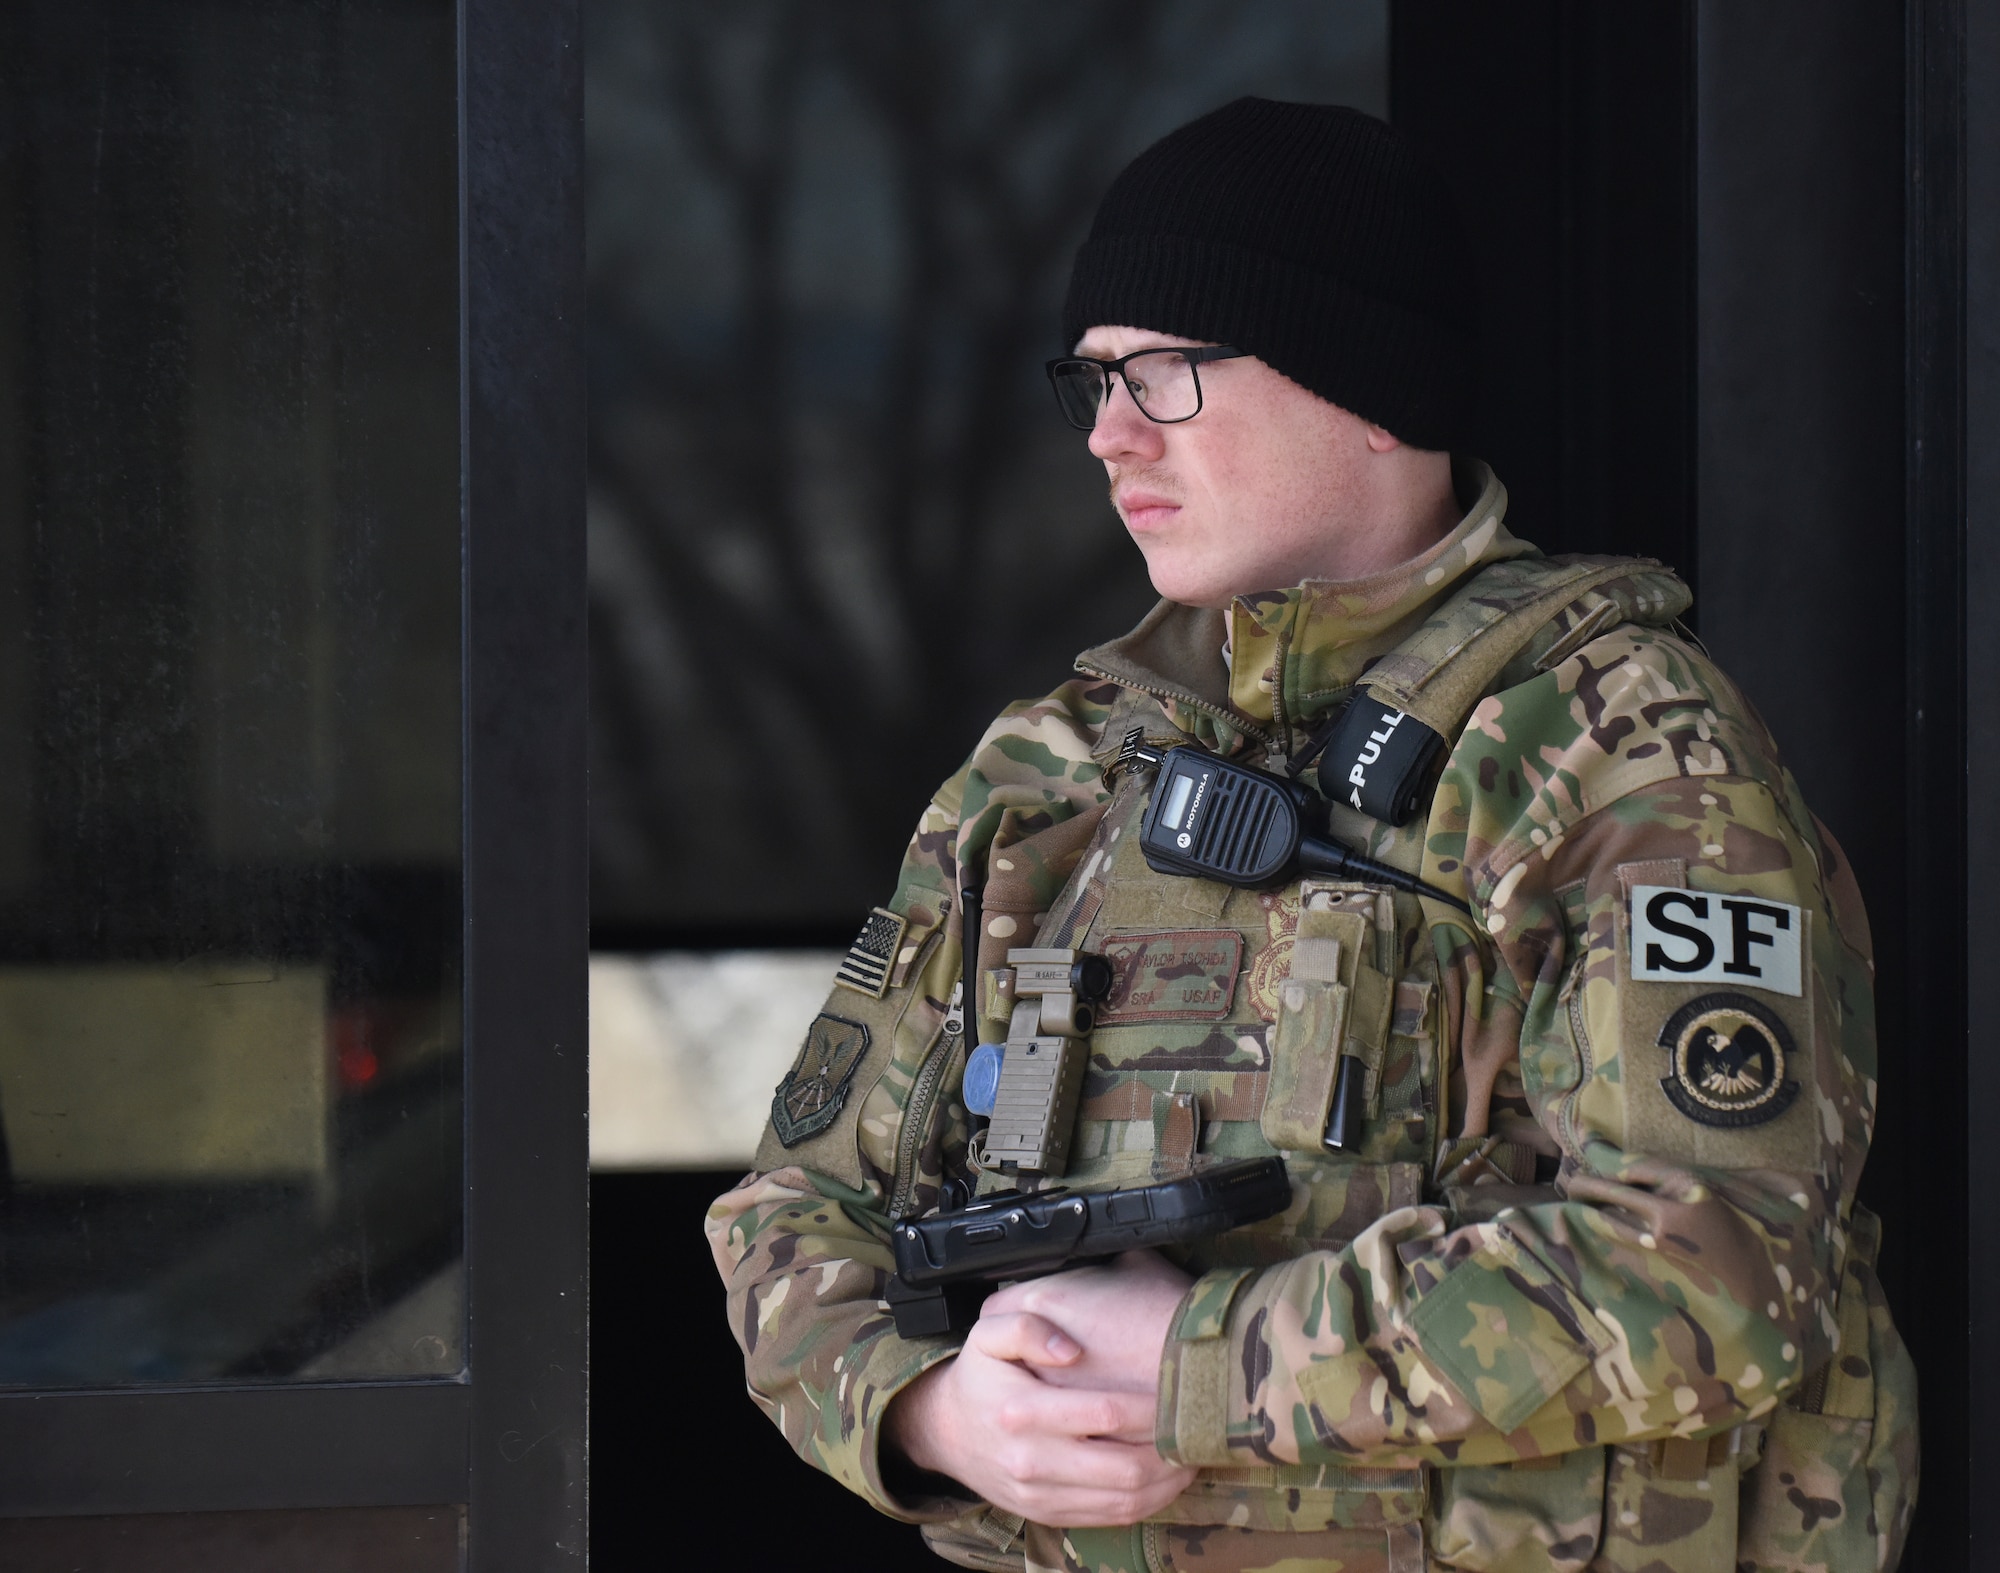 Senior Airman Taylor Tschida, a 28th Security Forces Squadron alarm monitor, stands outside the Liberty Gate waiting for the next car to approach for entry to Ellsworth Air Force Base, S.D., Dec. 4, 2018. Each person that comes through the gate gets checked for proper authorization, correct seatbelt wear and that their vehicle has registration on the plates. (U.S. Air Force photo by 2nd Lt. Joshua Sinclair)